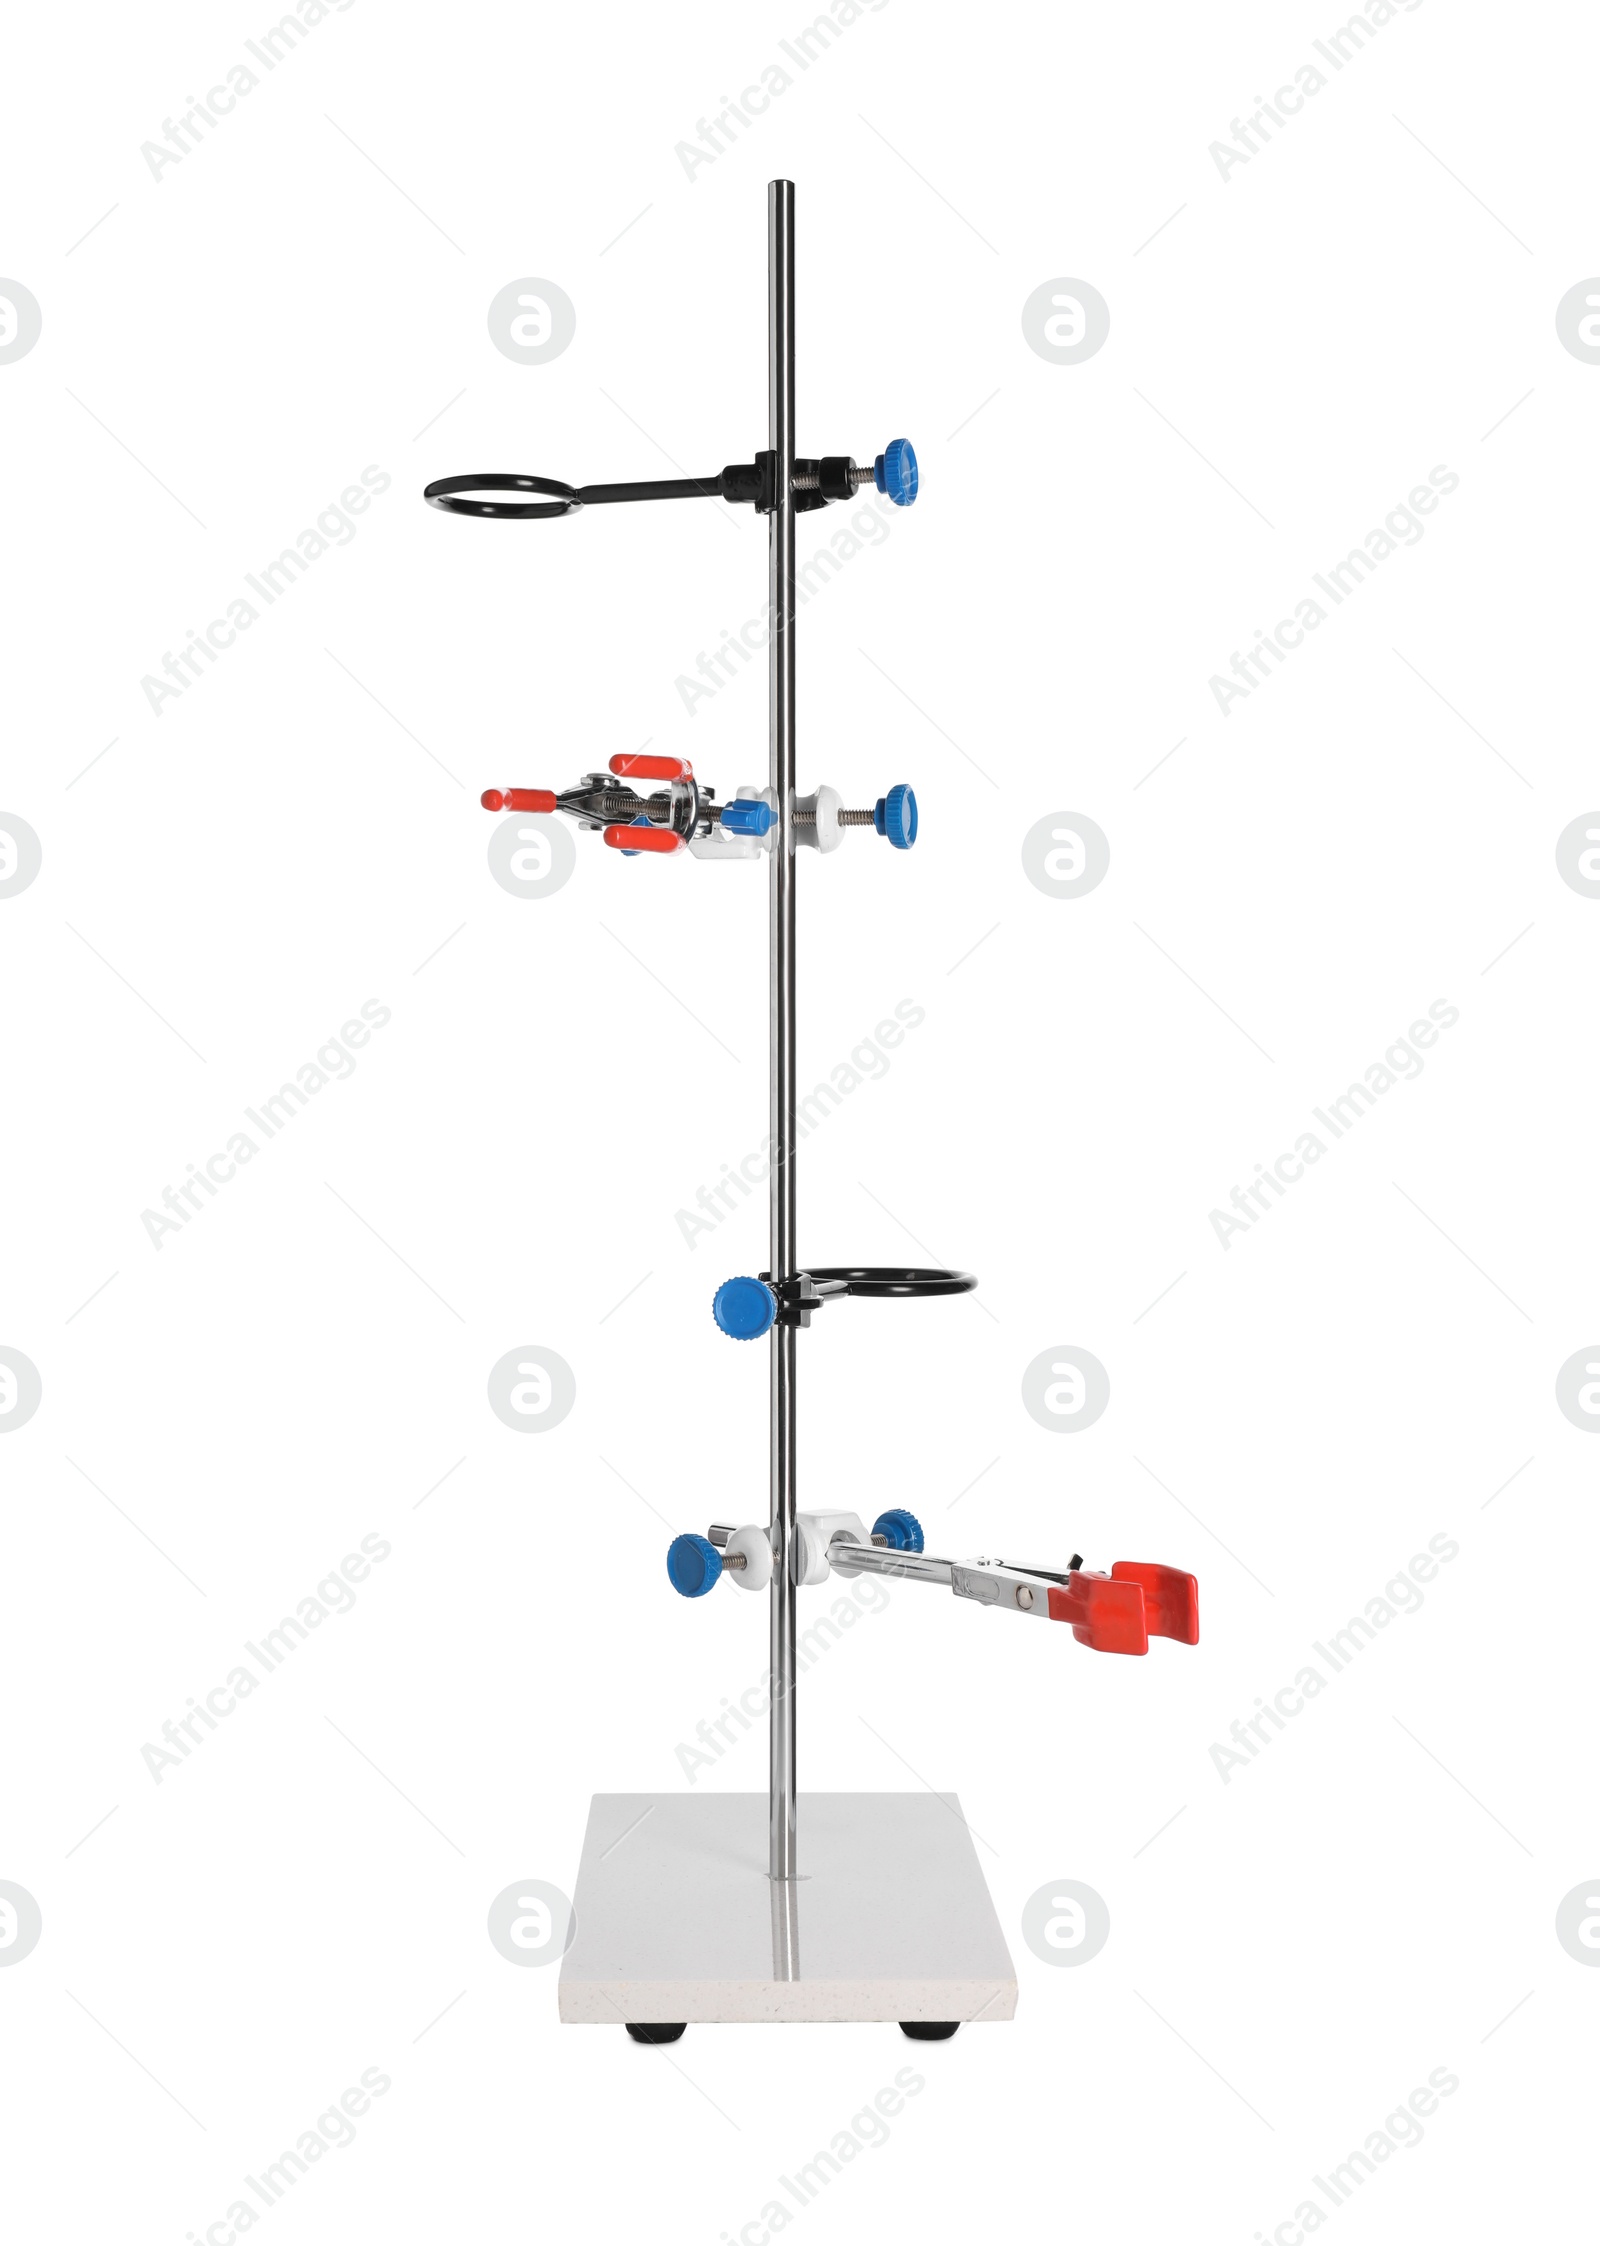 Photo of Retort stand with many clamps isolated on white